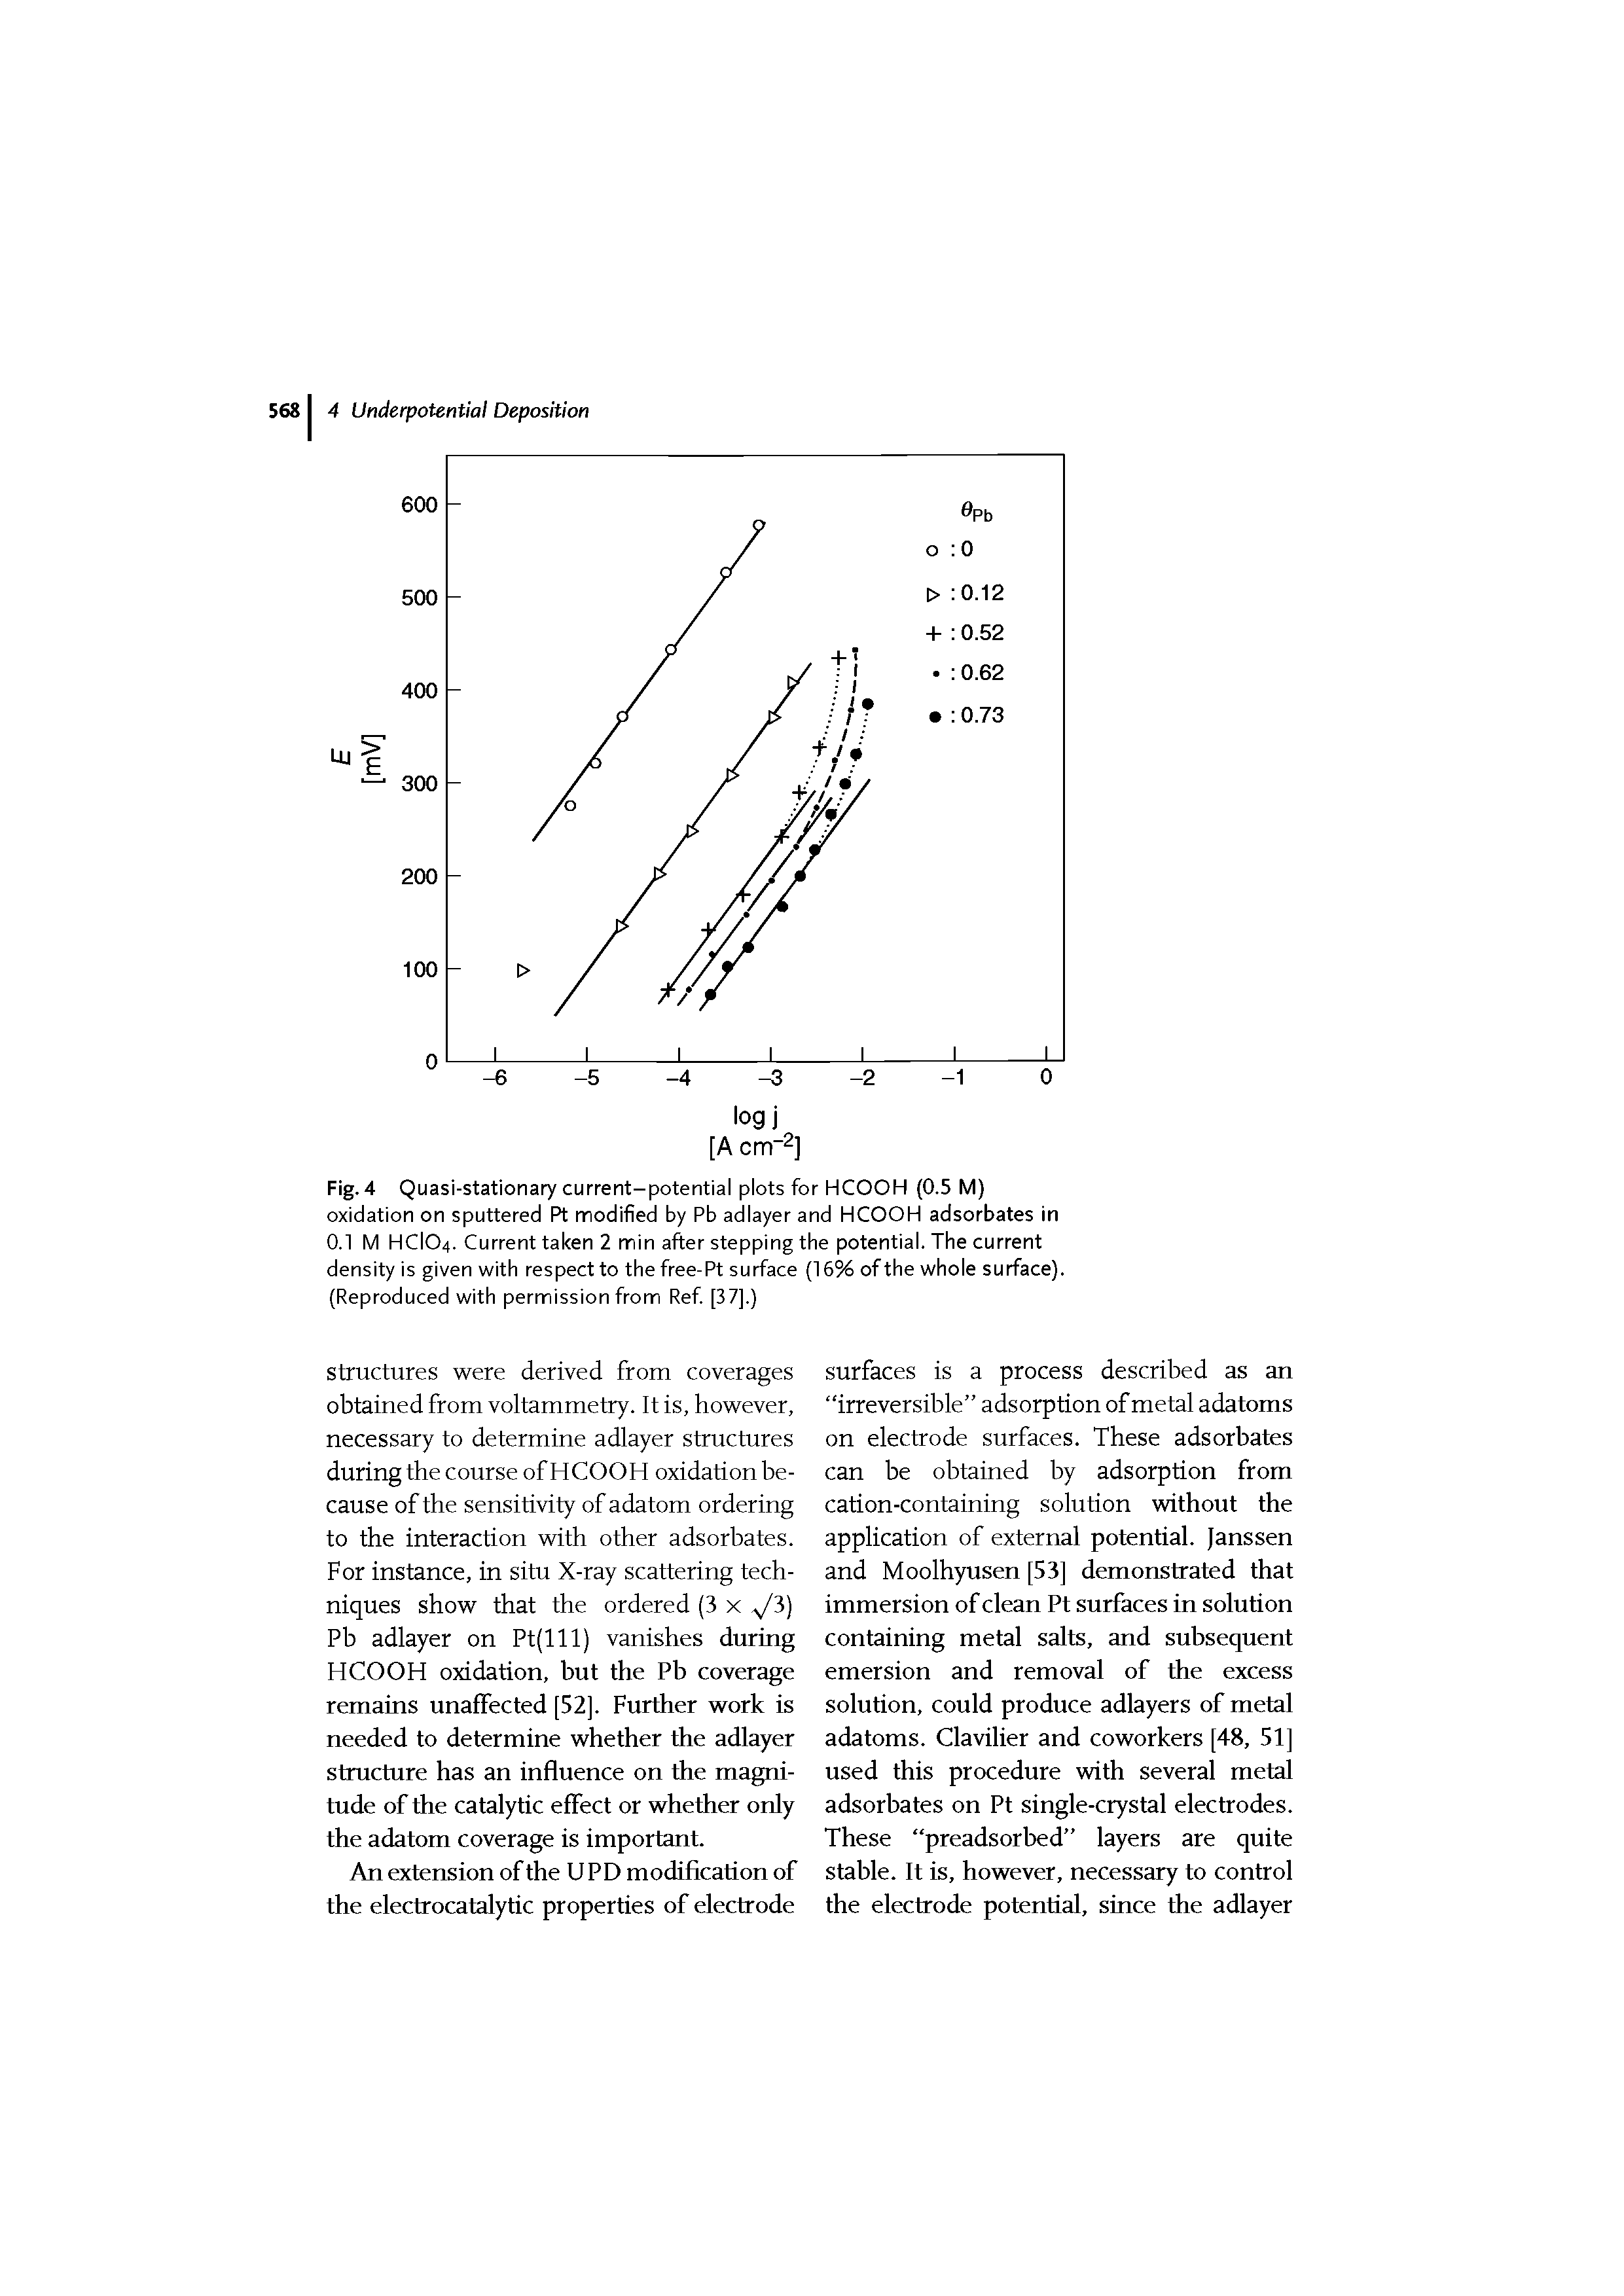 Fig. 4 Quasi-stationary current-potential plots for HCOOH (0.5 M) oxidation on sputtered Pt modified by Pb adlayer and HCOOH adsorbates in 0.1 M HCIO4. Current taken 2 min after stepping the potential. The current density is given with respect to the free-Pt surface (16% of the whole surface).